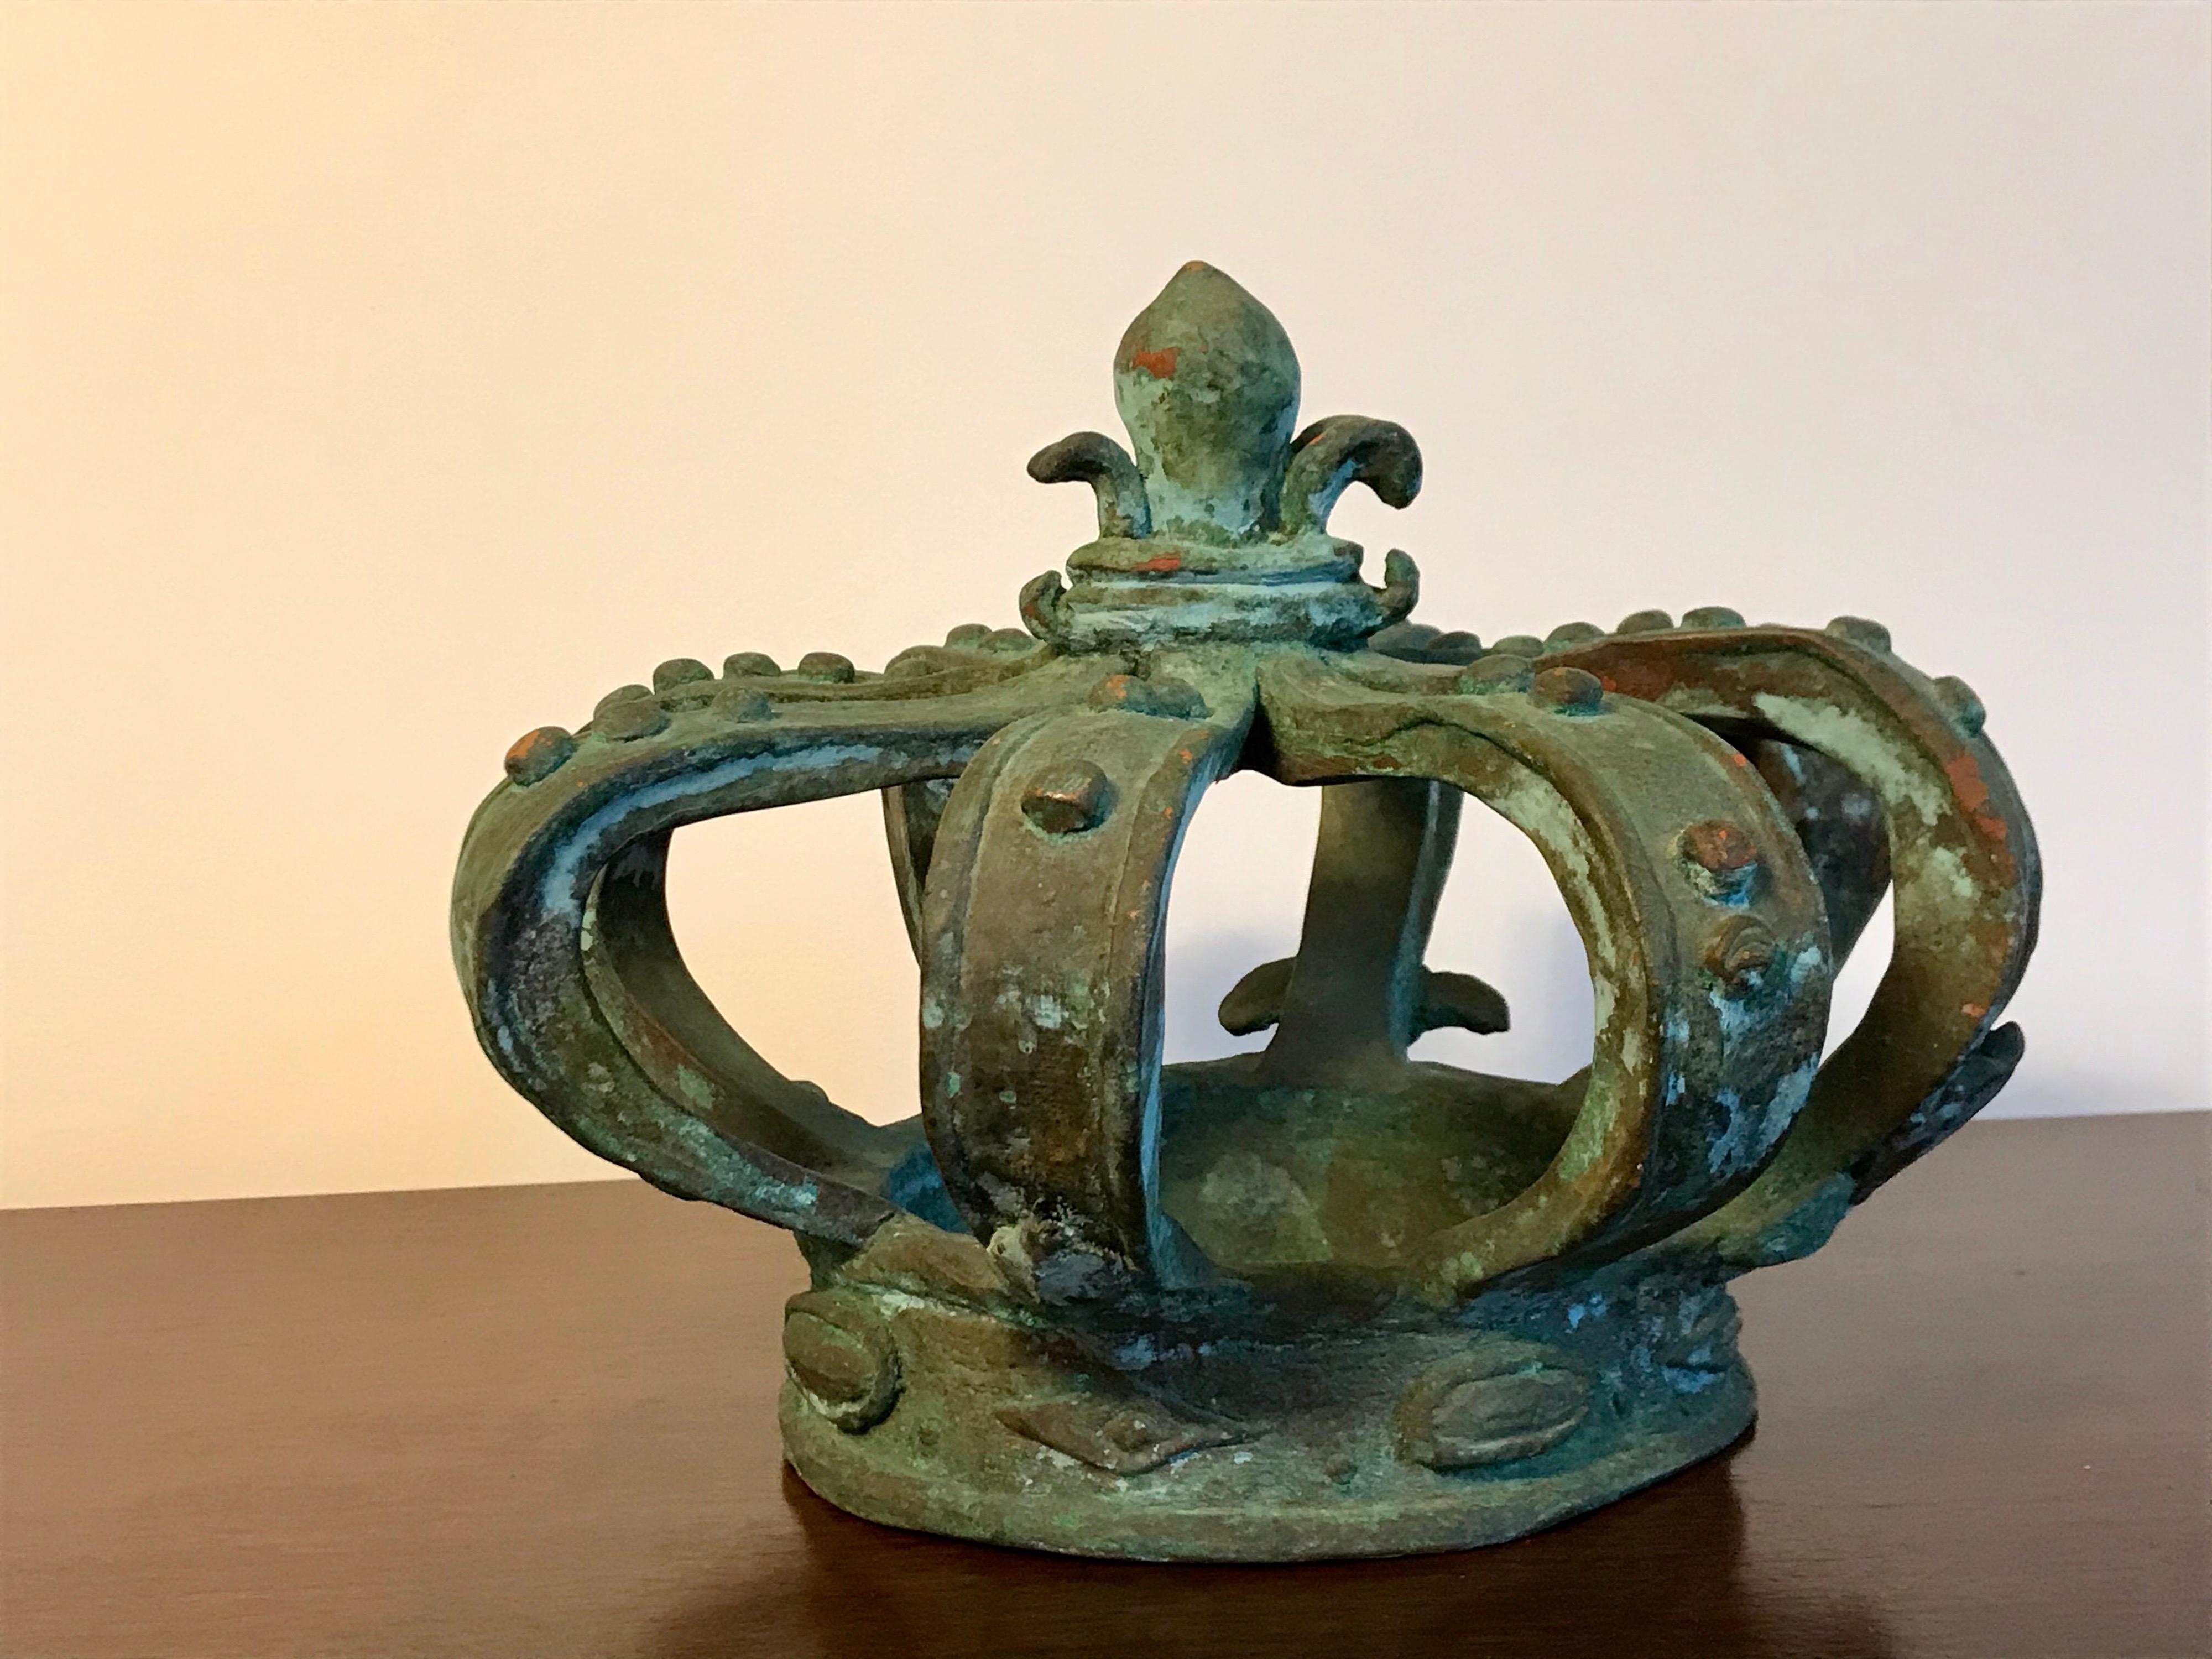 A nice decorative art object.
Made of solid cast bronze.
This is a hefty piece weighting roughly 20 pounds....